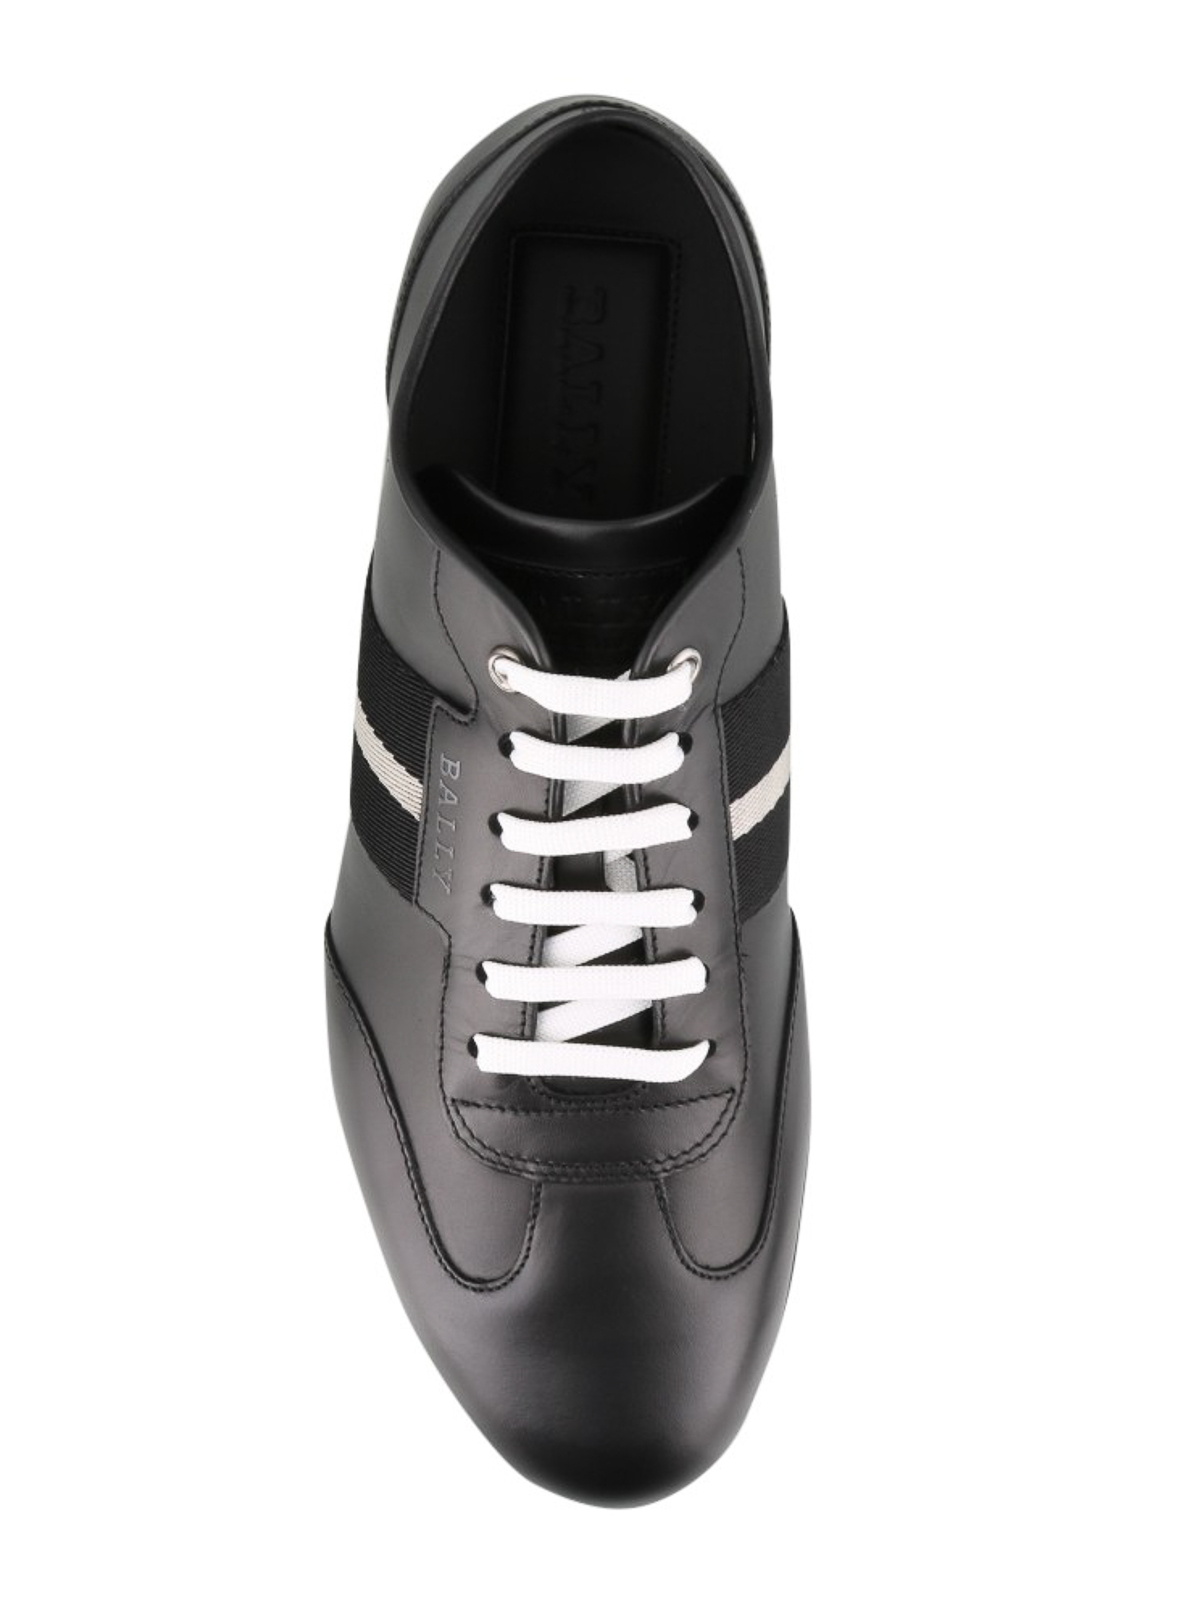 Trainers Bally - Harlam New sneakers - 6231547 | Shop online at iKRIX